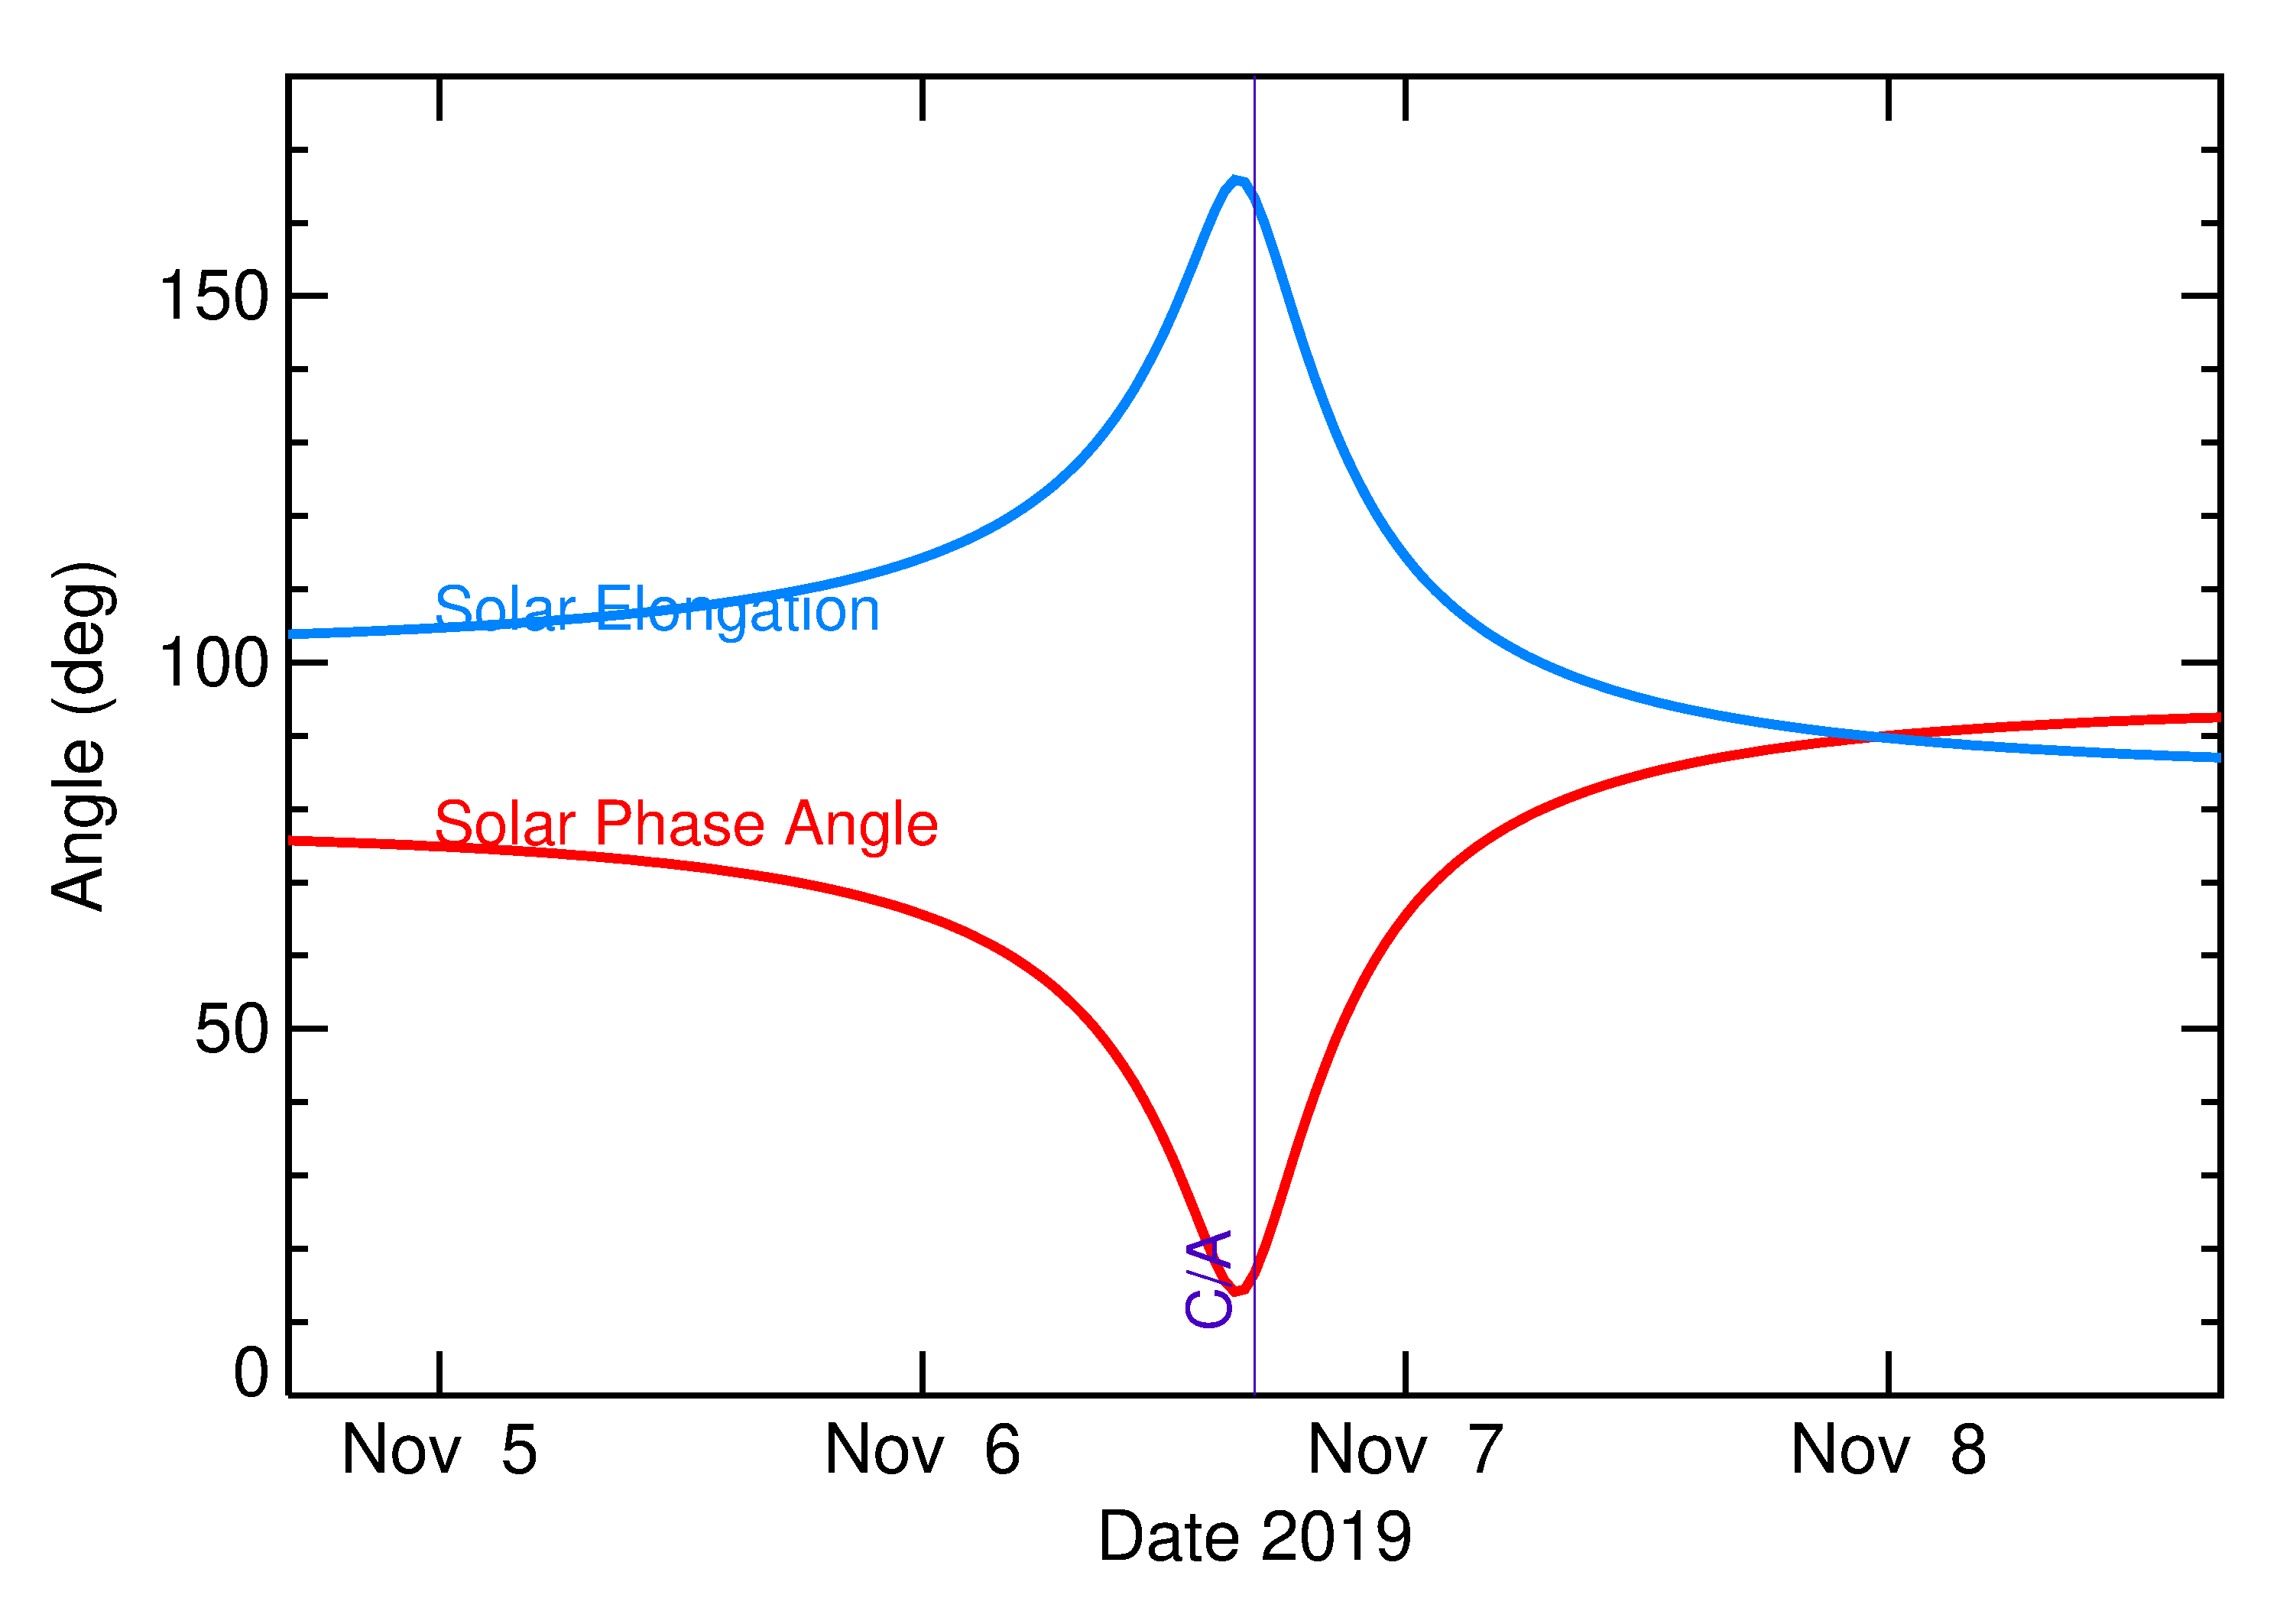 Solar Elongation and Solar Phase Angle of 2019 VS4 in the days around closest approach